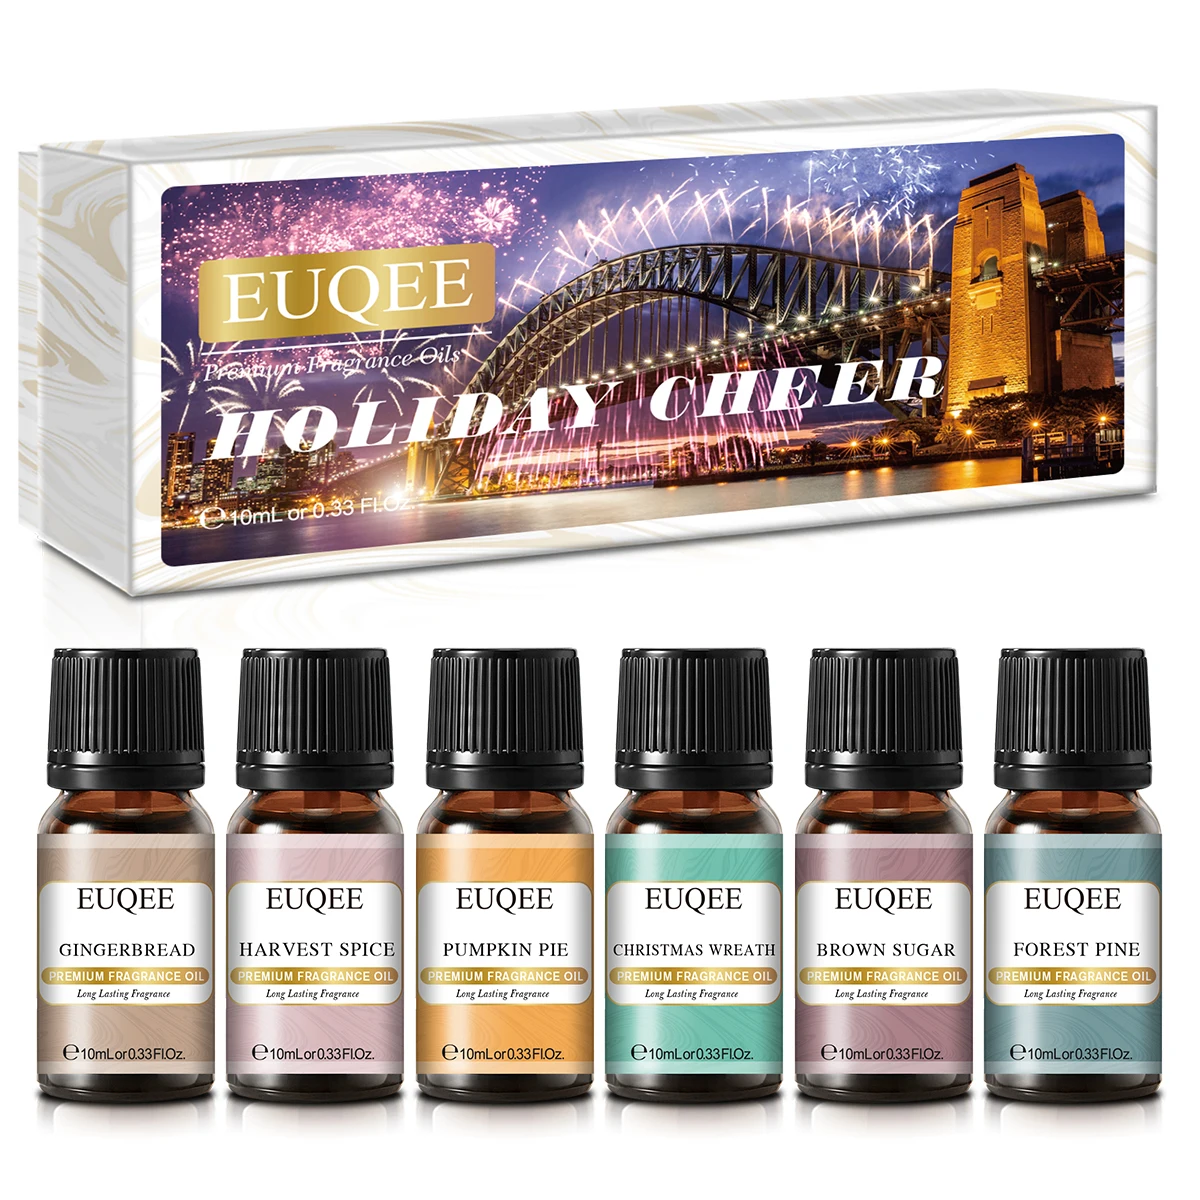 EUQEE 6pcs Fragrance Oil Set 10ml Sweet Perfume Oils For Aromatherapy Diffuser Gingerbread Forest Pine Pumpkin Pie Harvest Spice